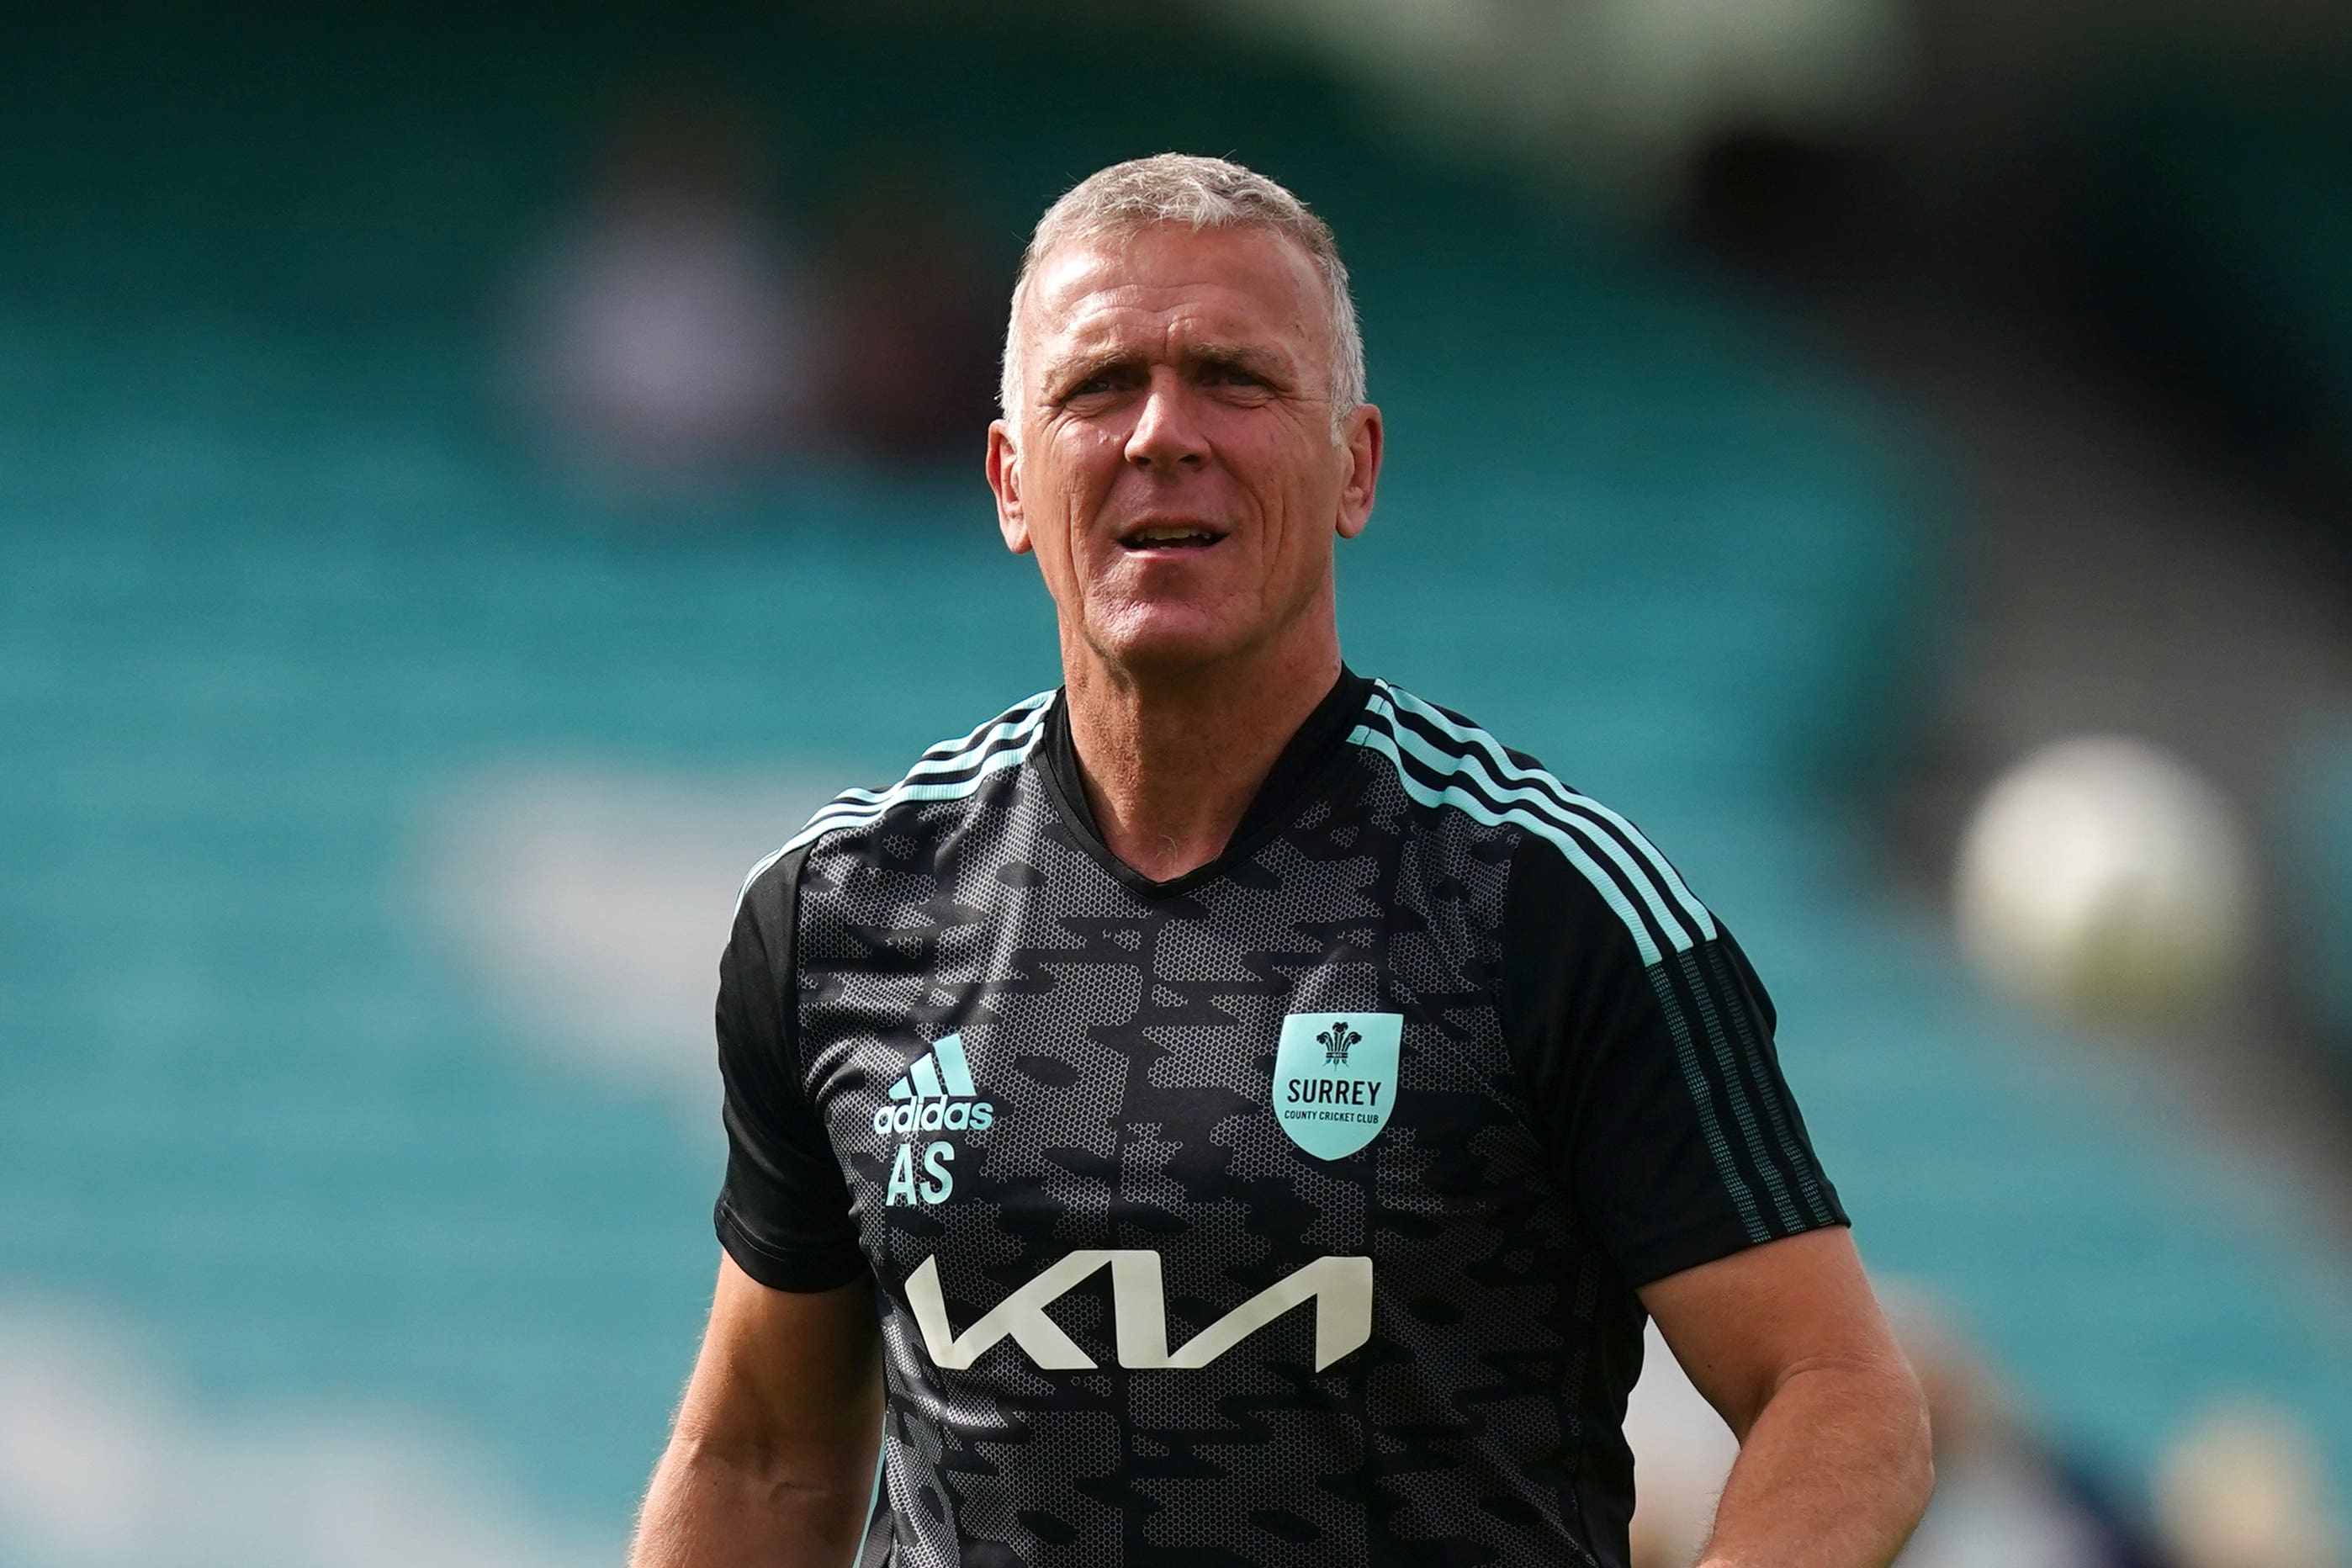 Alec Stewart will take a temporary absence of leave from his role as Surrey director of cricket (Mike Egerton/PA)